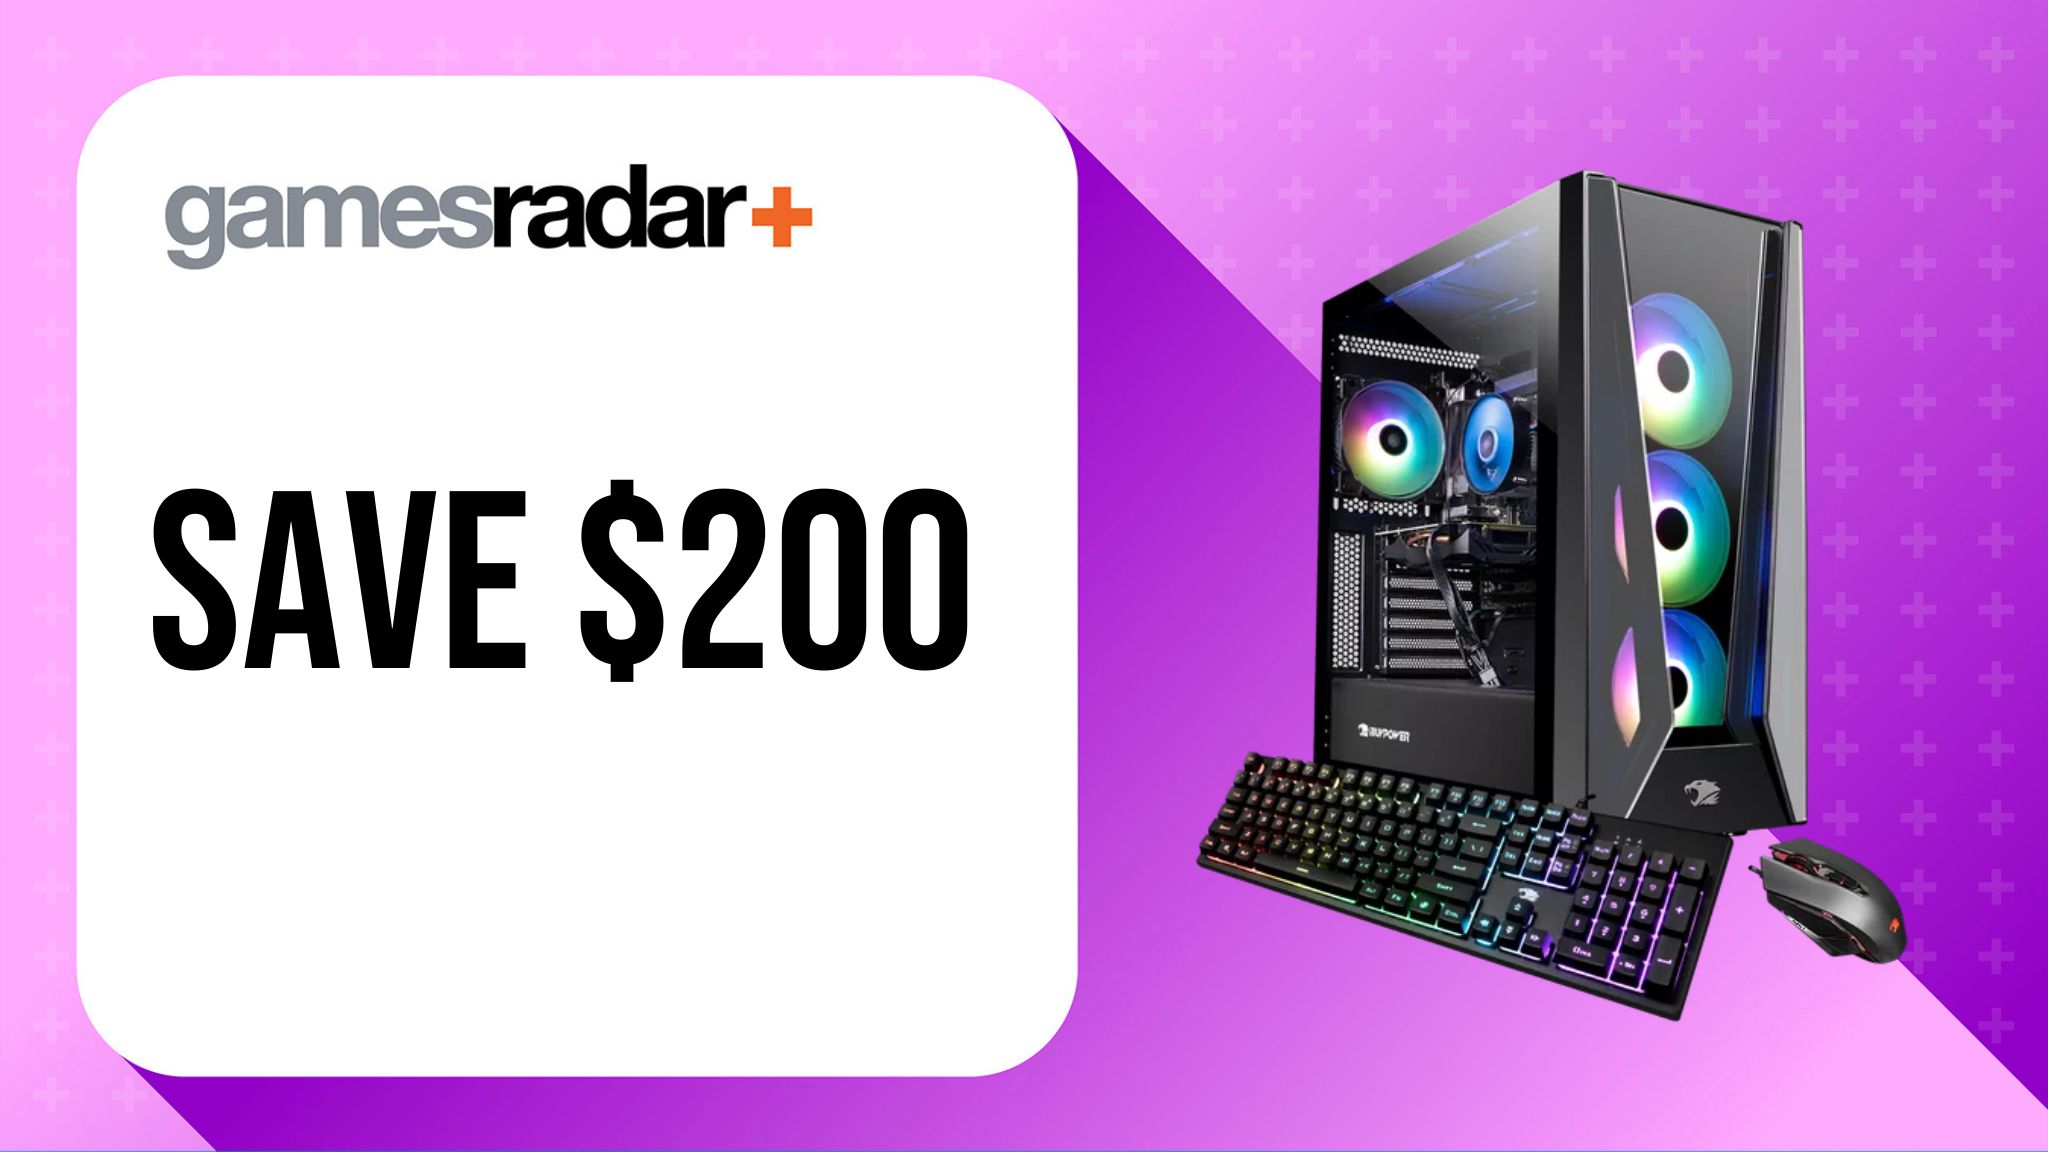 iBuypower Trace MR258i Deal That Saves $200